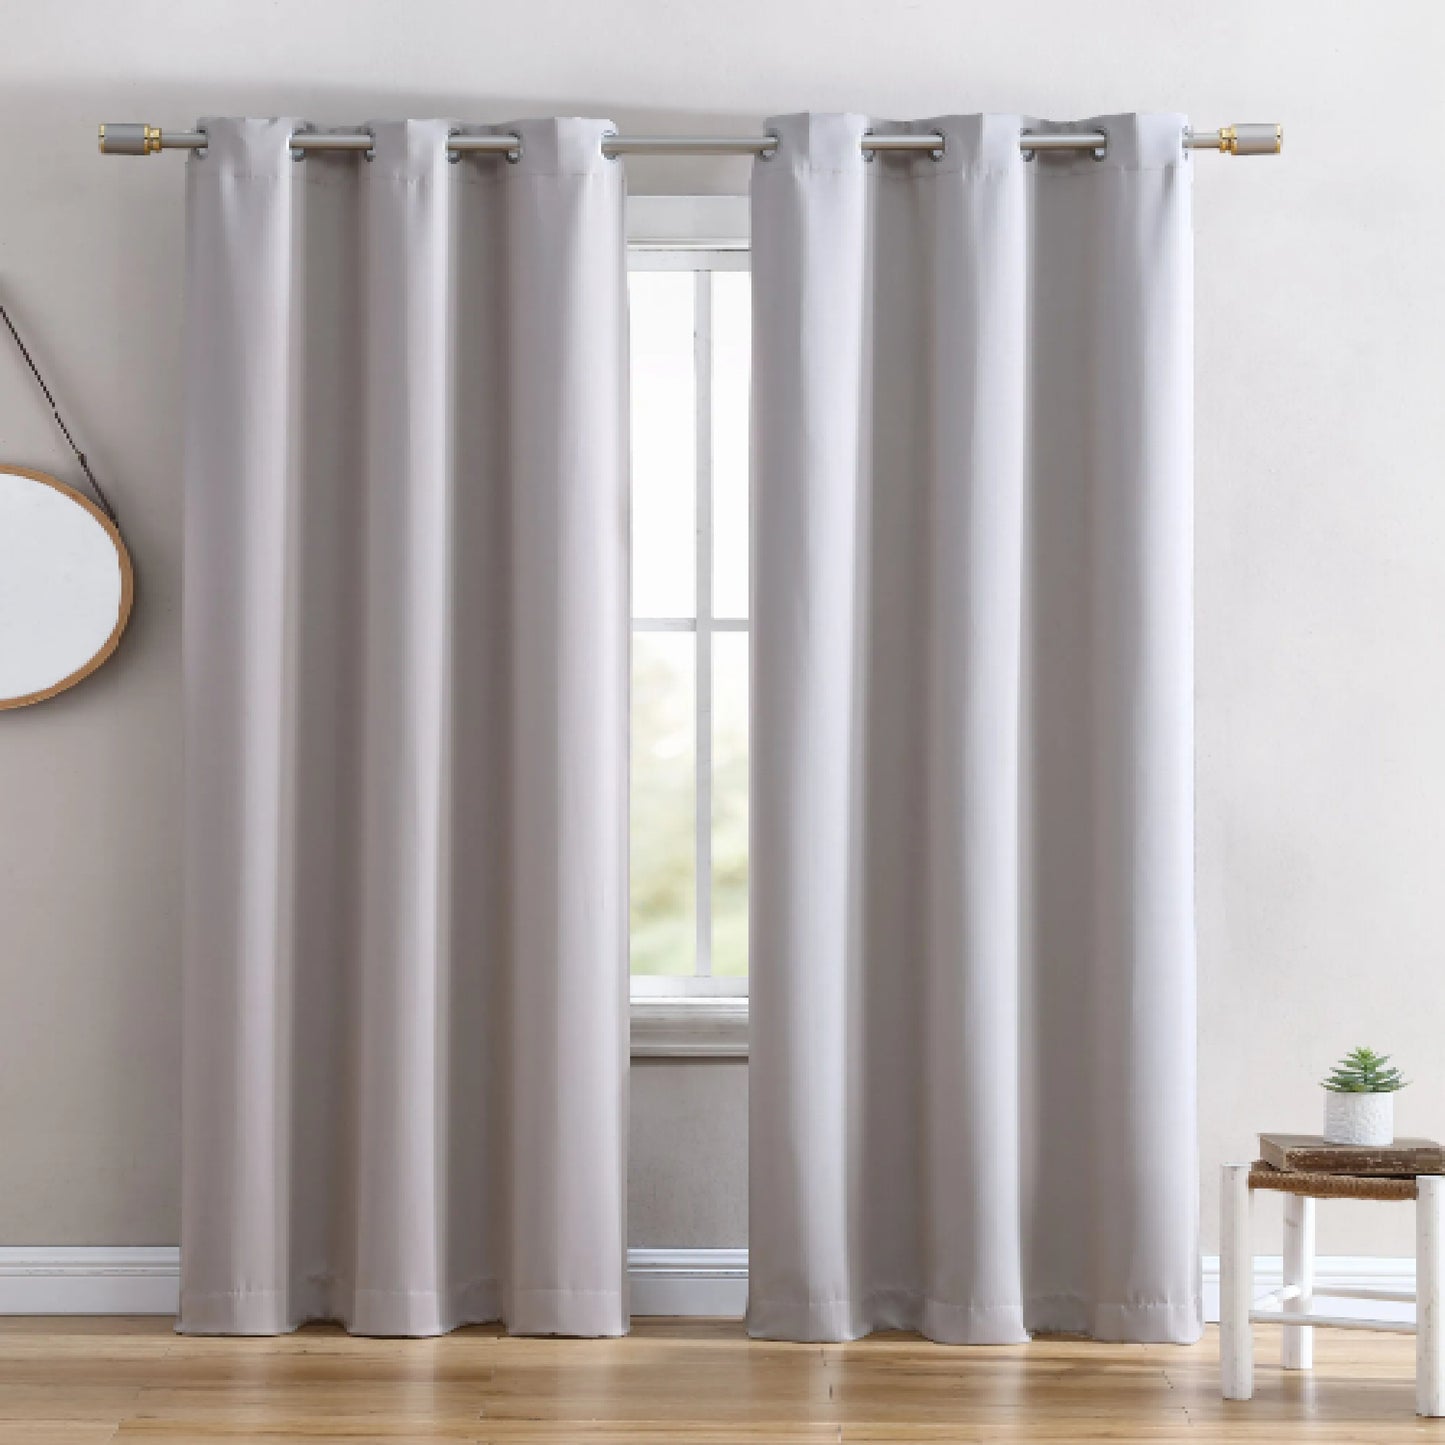 Ring Top Solid Blackout Thermal Grommet Single Curtain Panel White